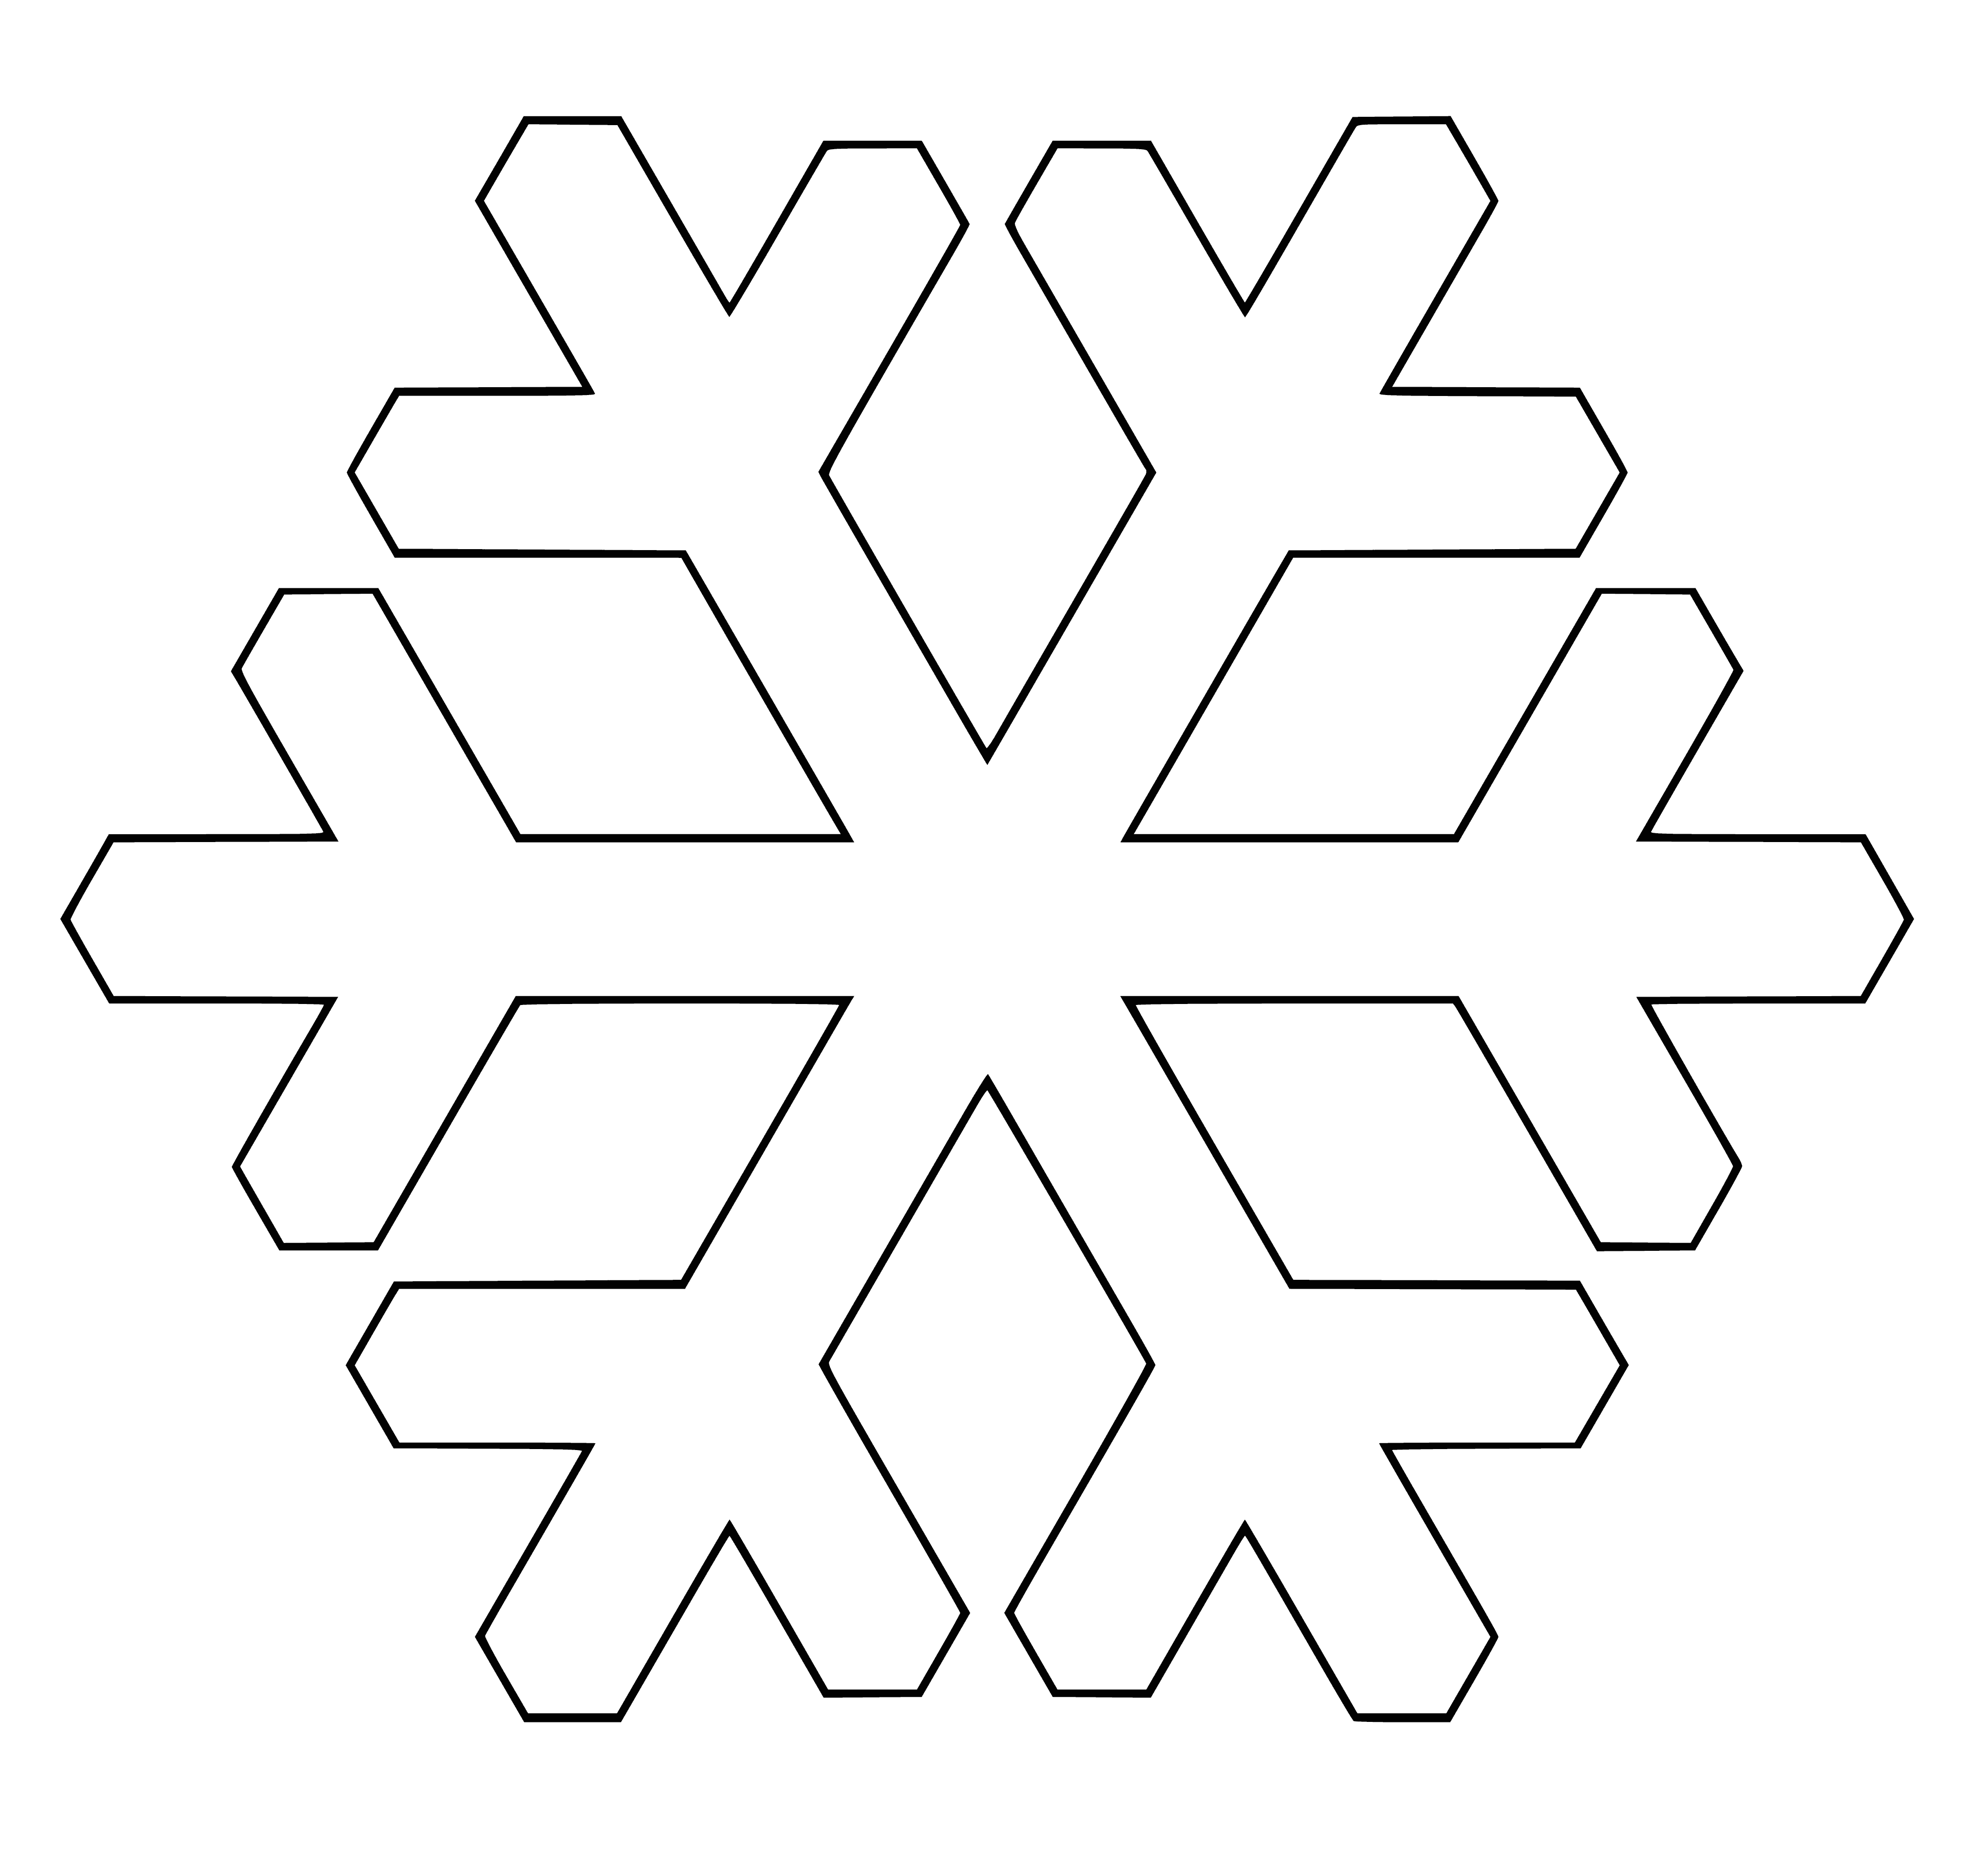 coloring page: A snowflake falls, spinning and fluffy, blown by wind to the side.